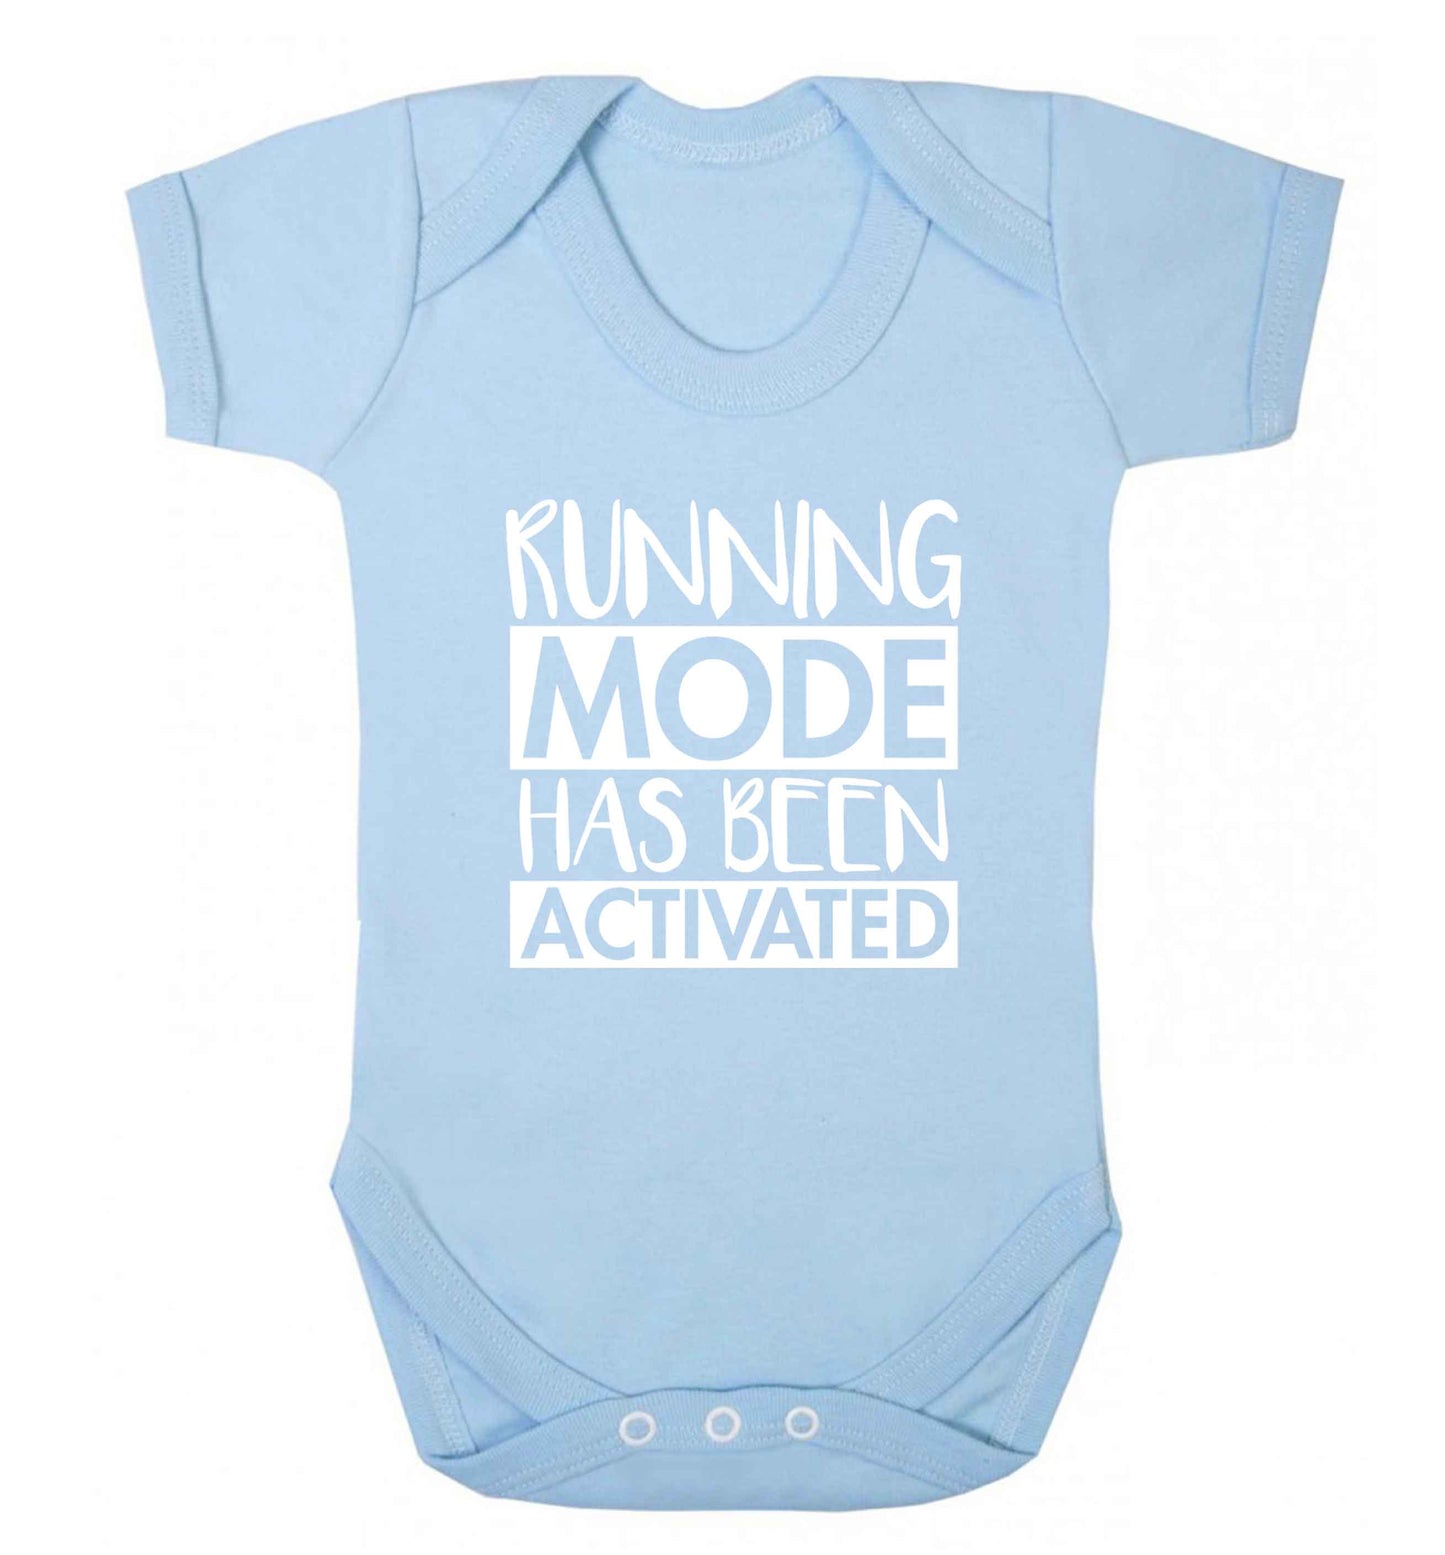 Running mode has been activated baby vest pale blue 18-24 months